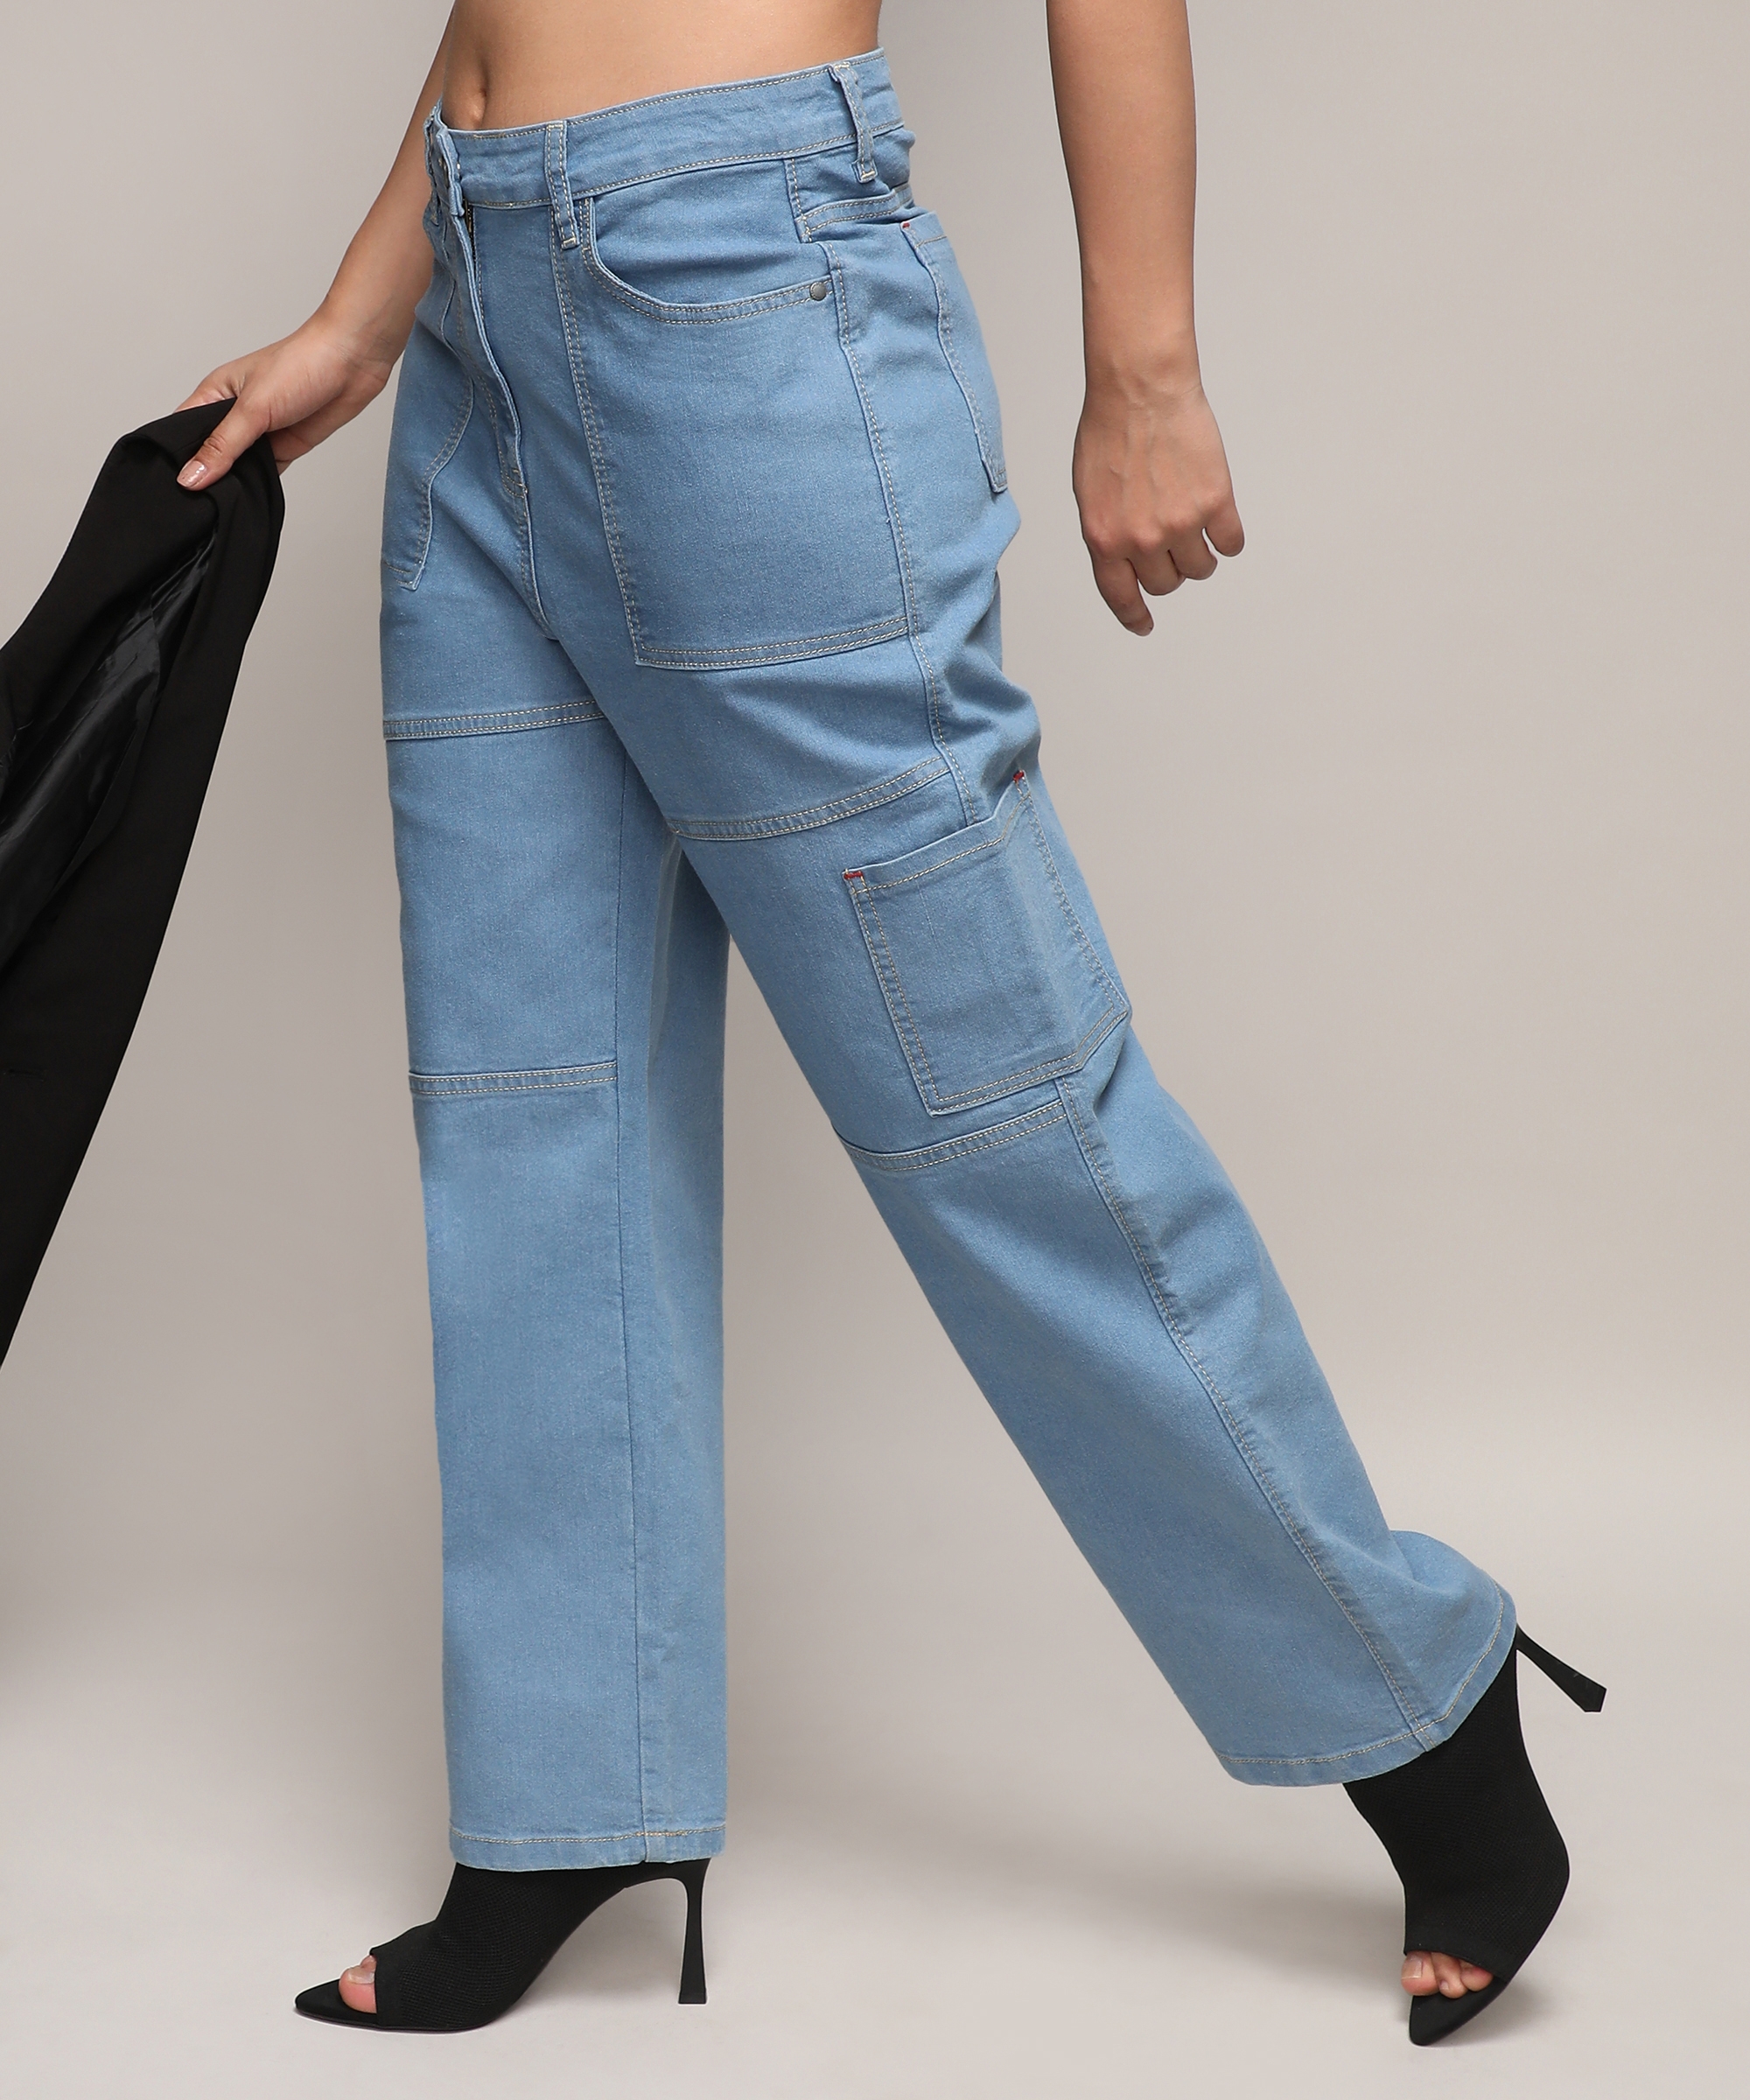 CAMPUS SUTRA | Women's Light Blue Solid Wide Leg Jeans